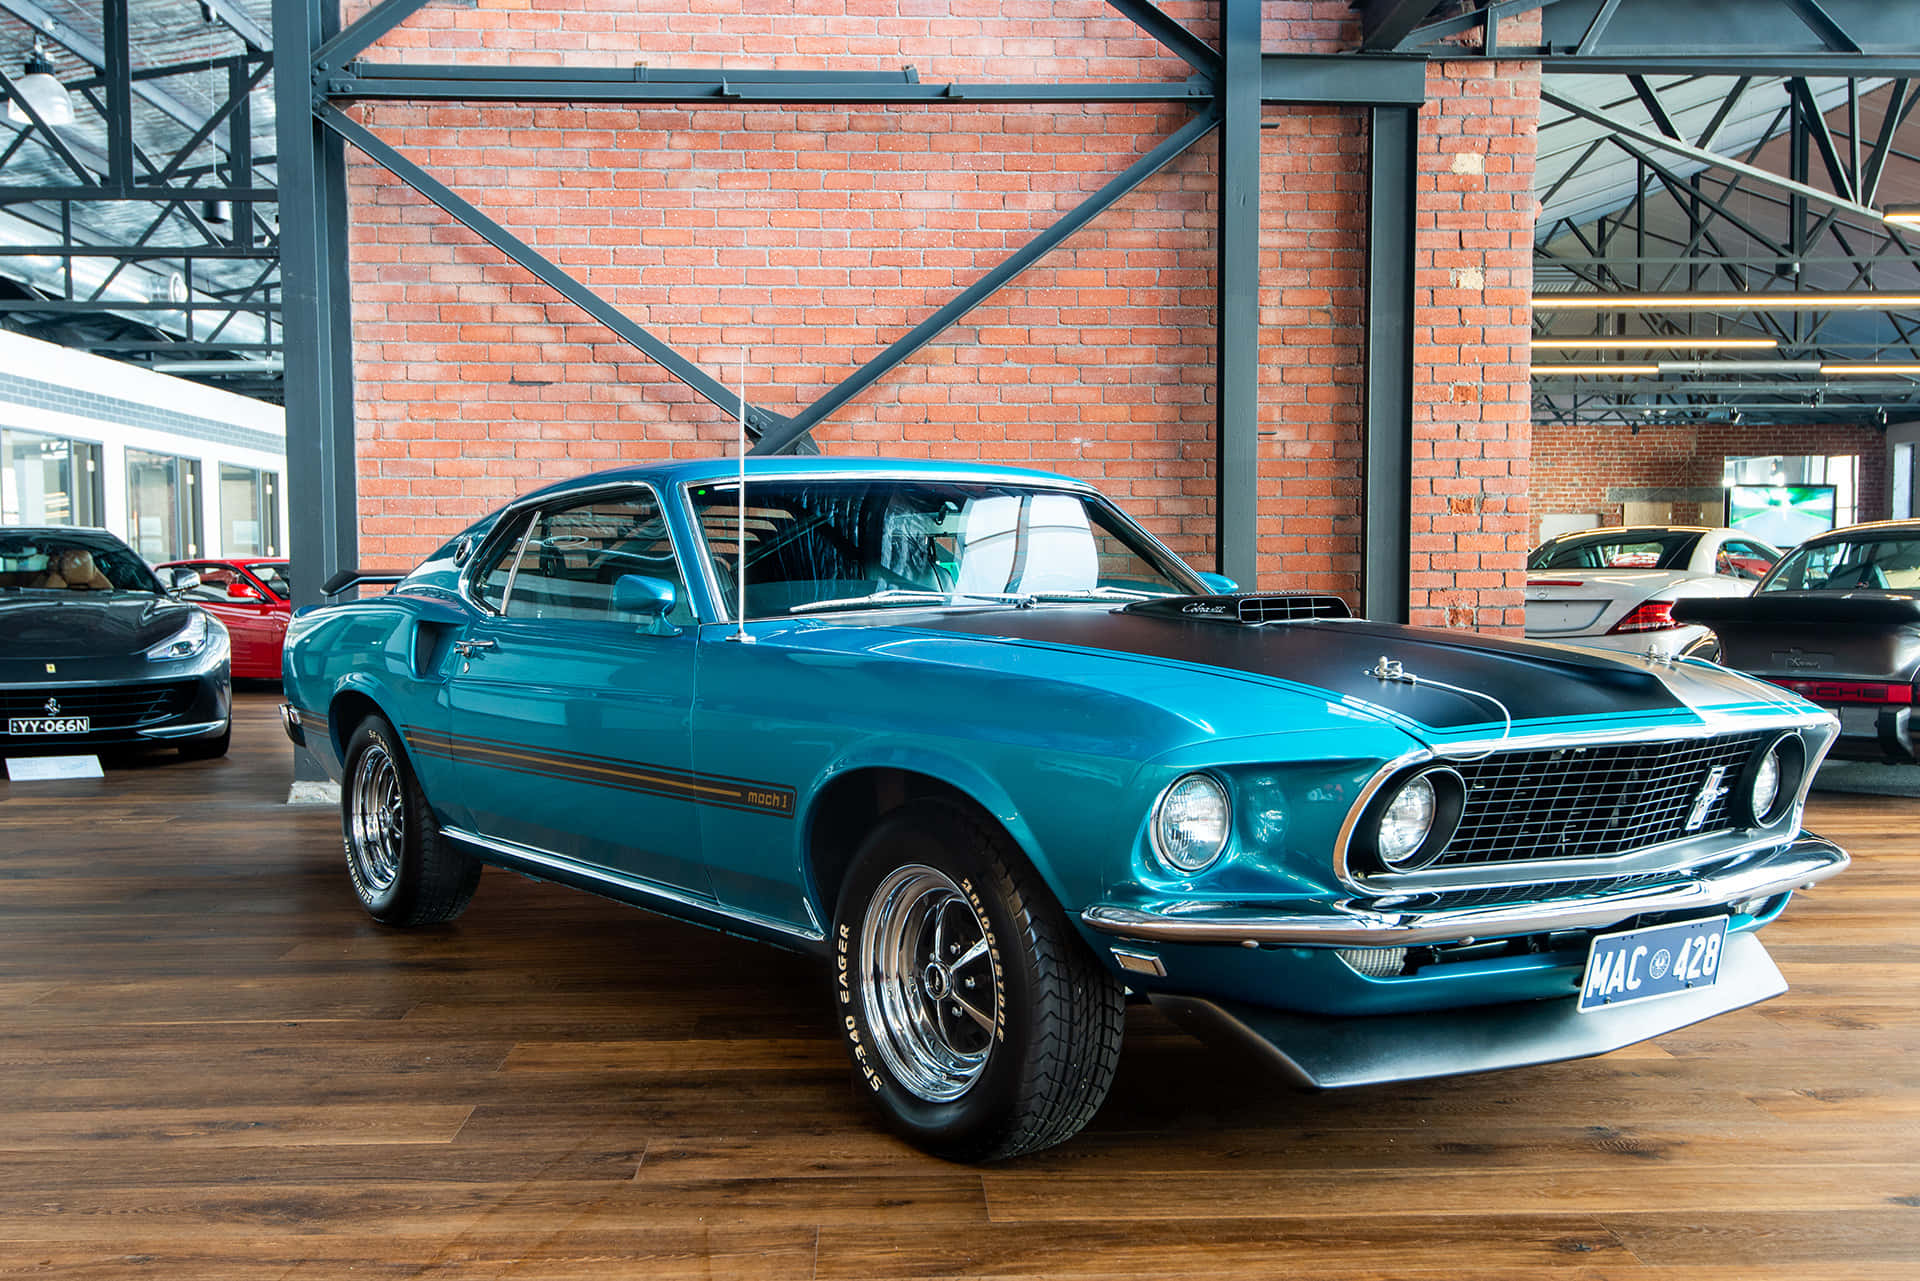 Ford Mustang Mach 1 - The Ultimate American Muscle Car Wallpaper